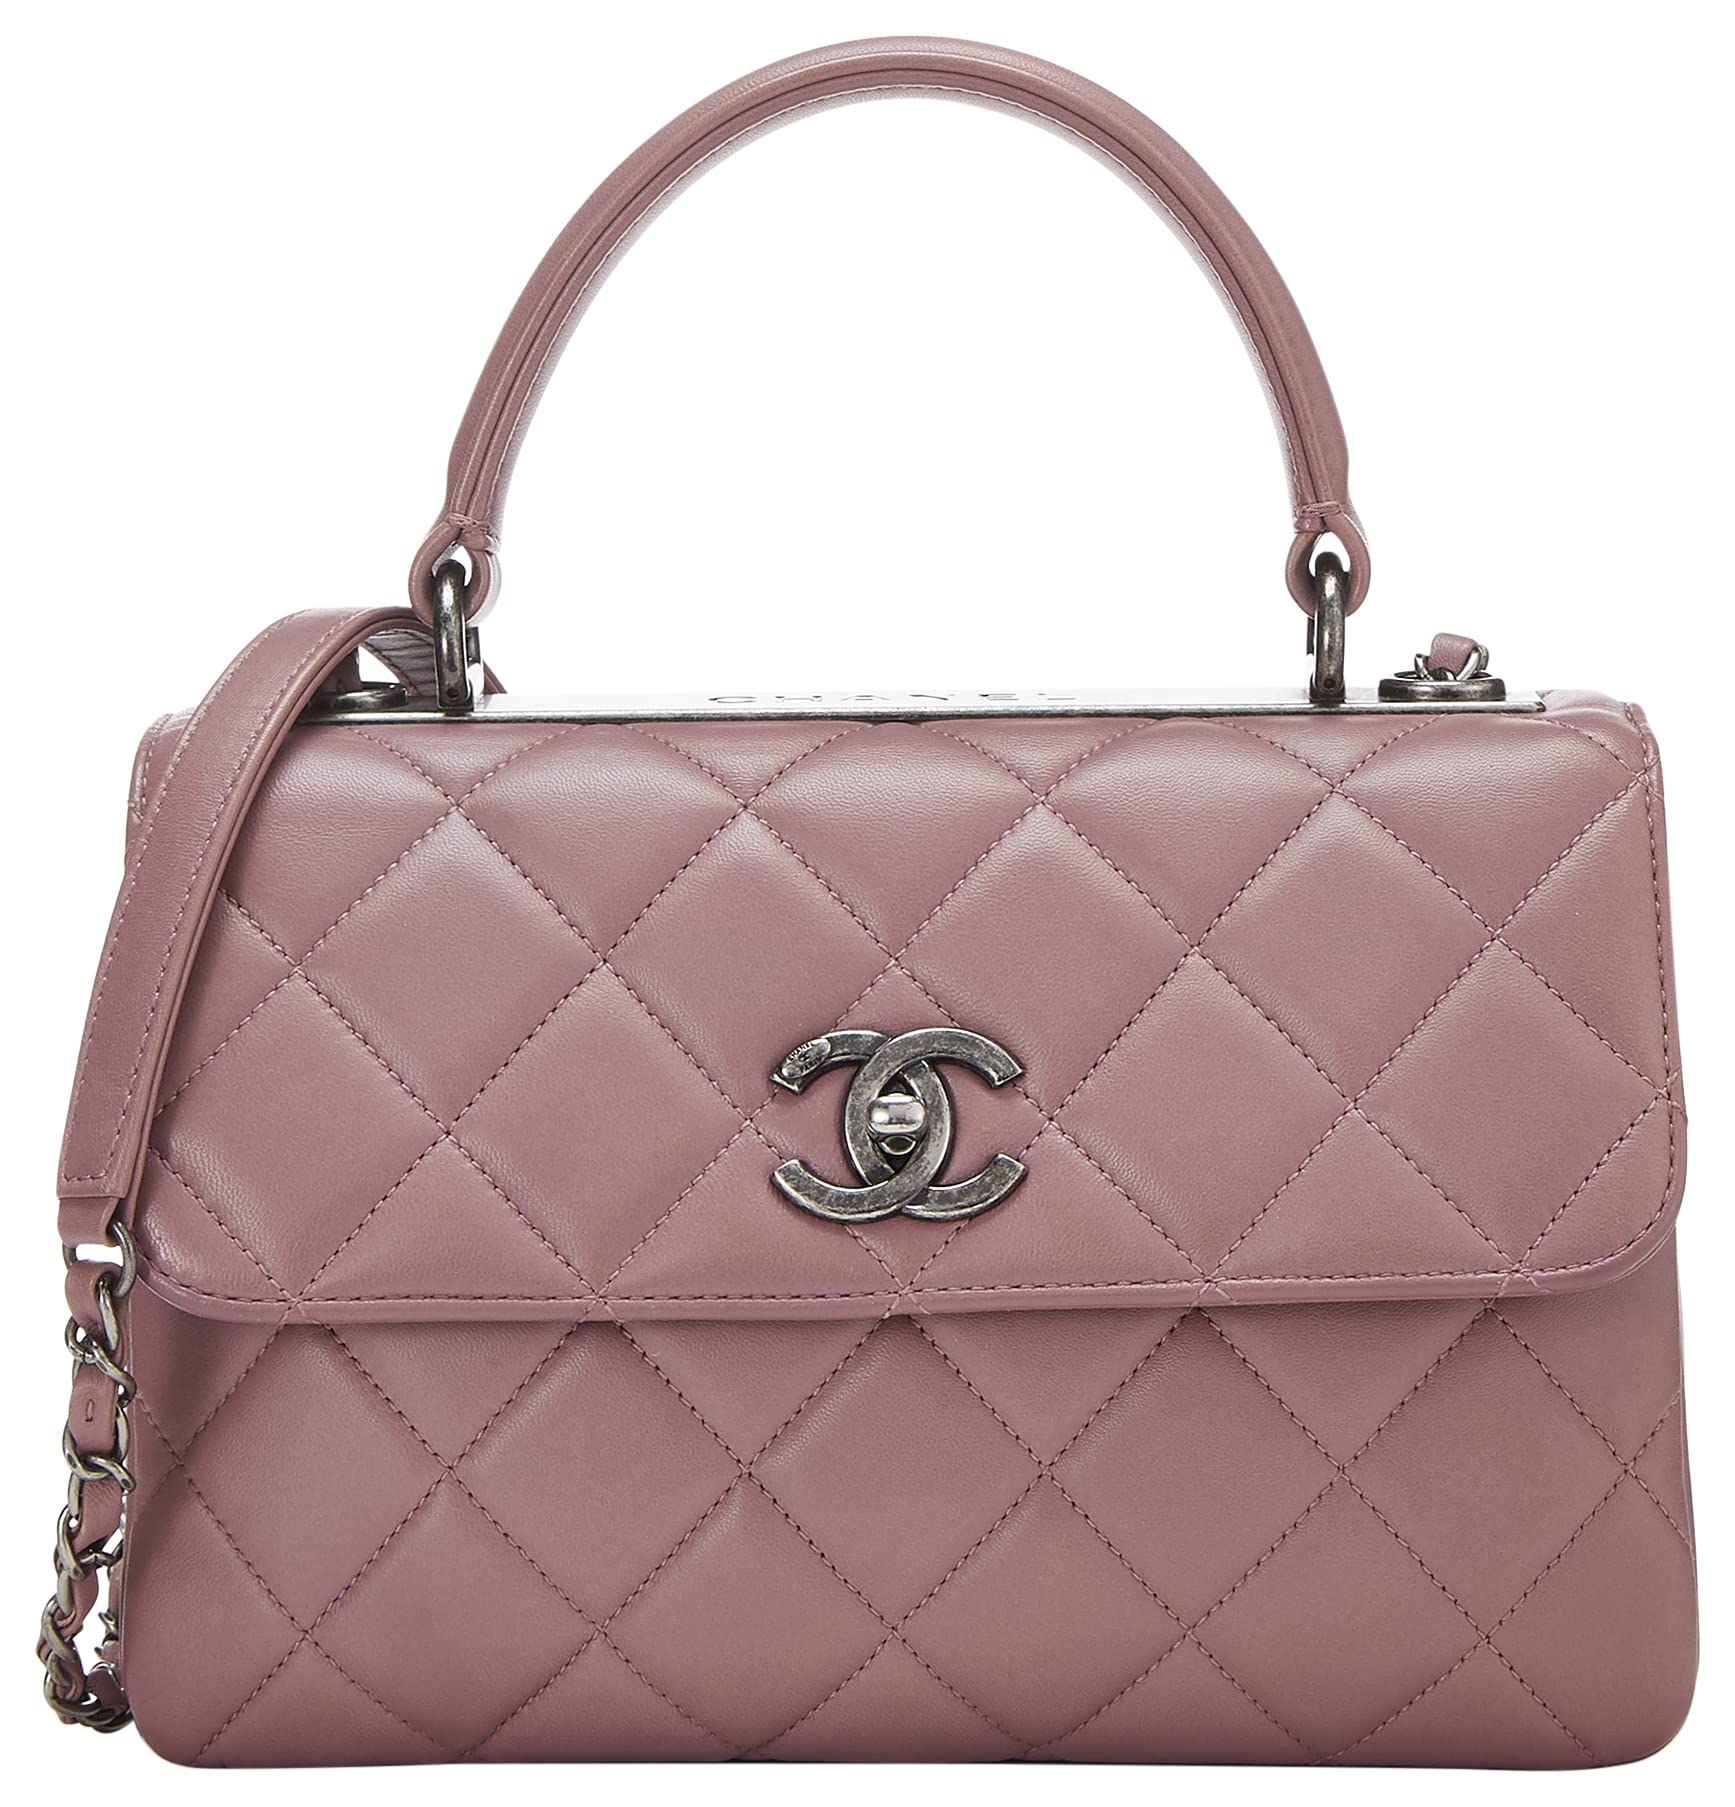 CHANEL, Pre-Loved Purple Quilted Lambskin Flap Top Handle Bag